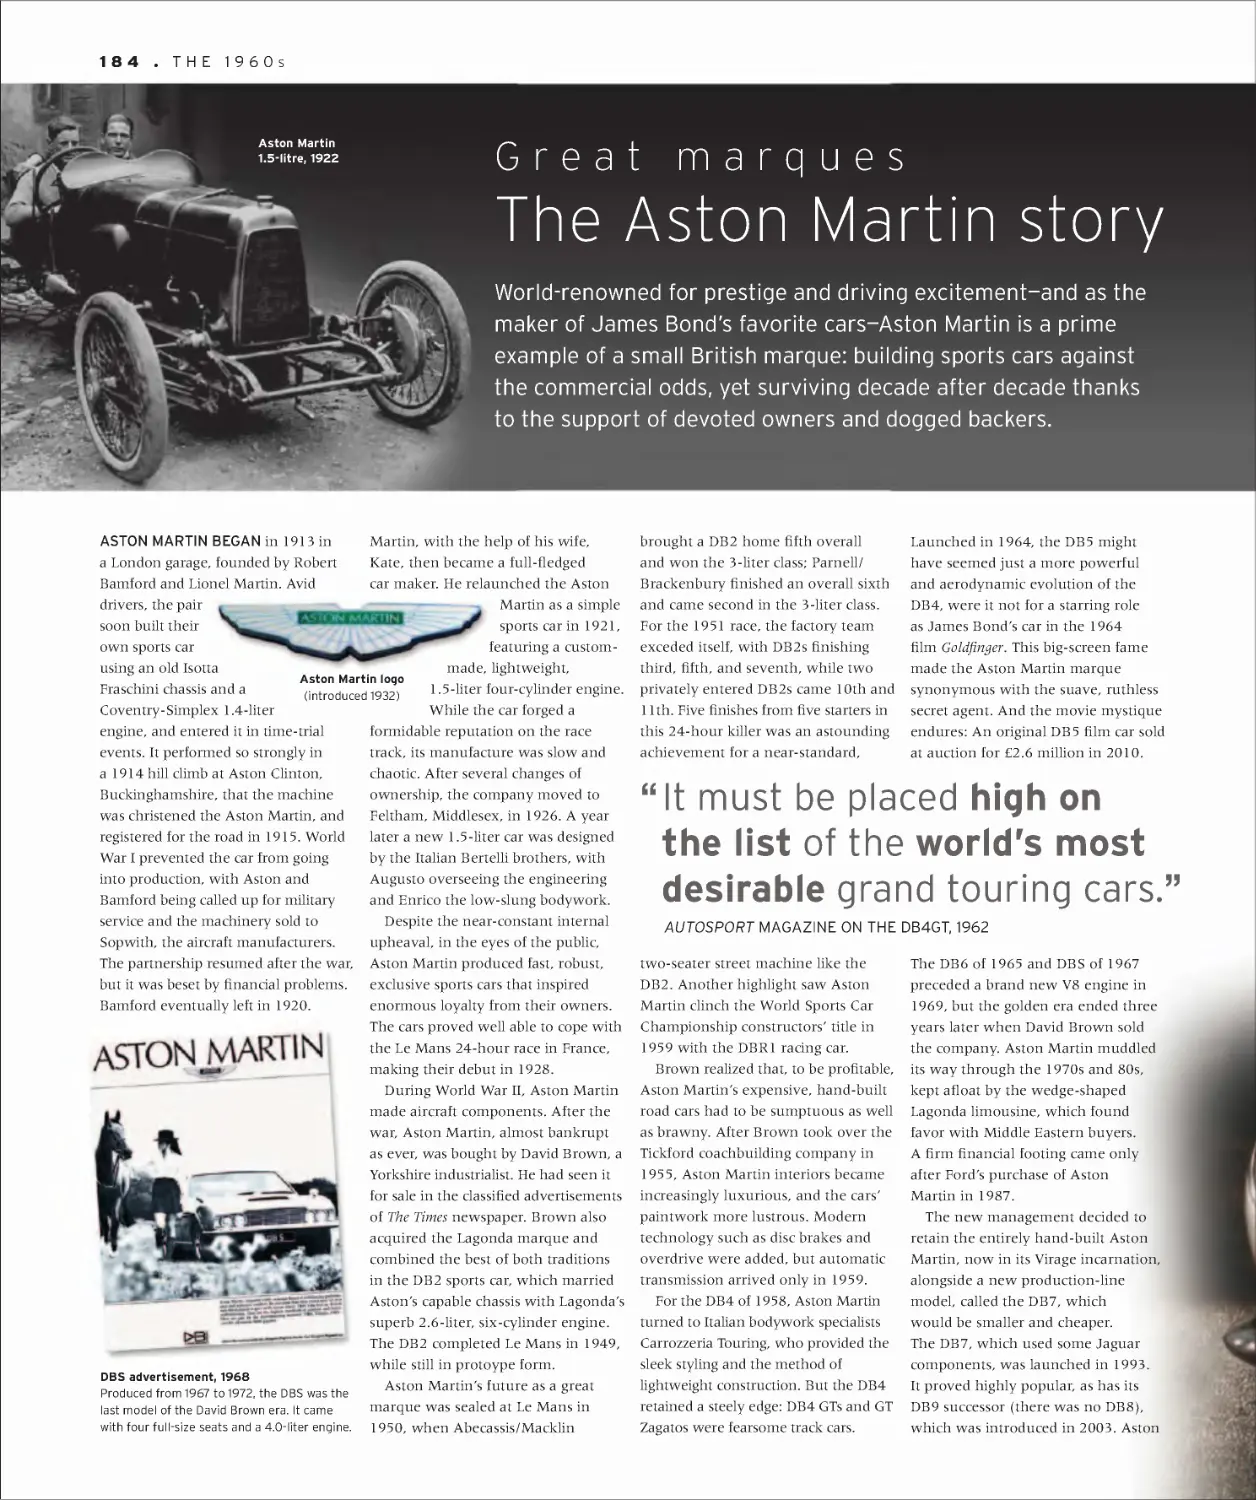 Great marques: The Aston Martin story 184